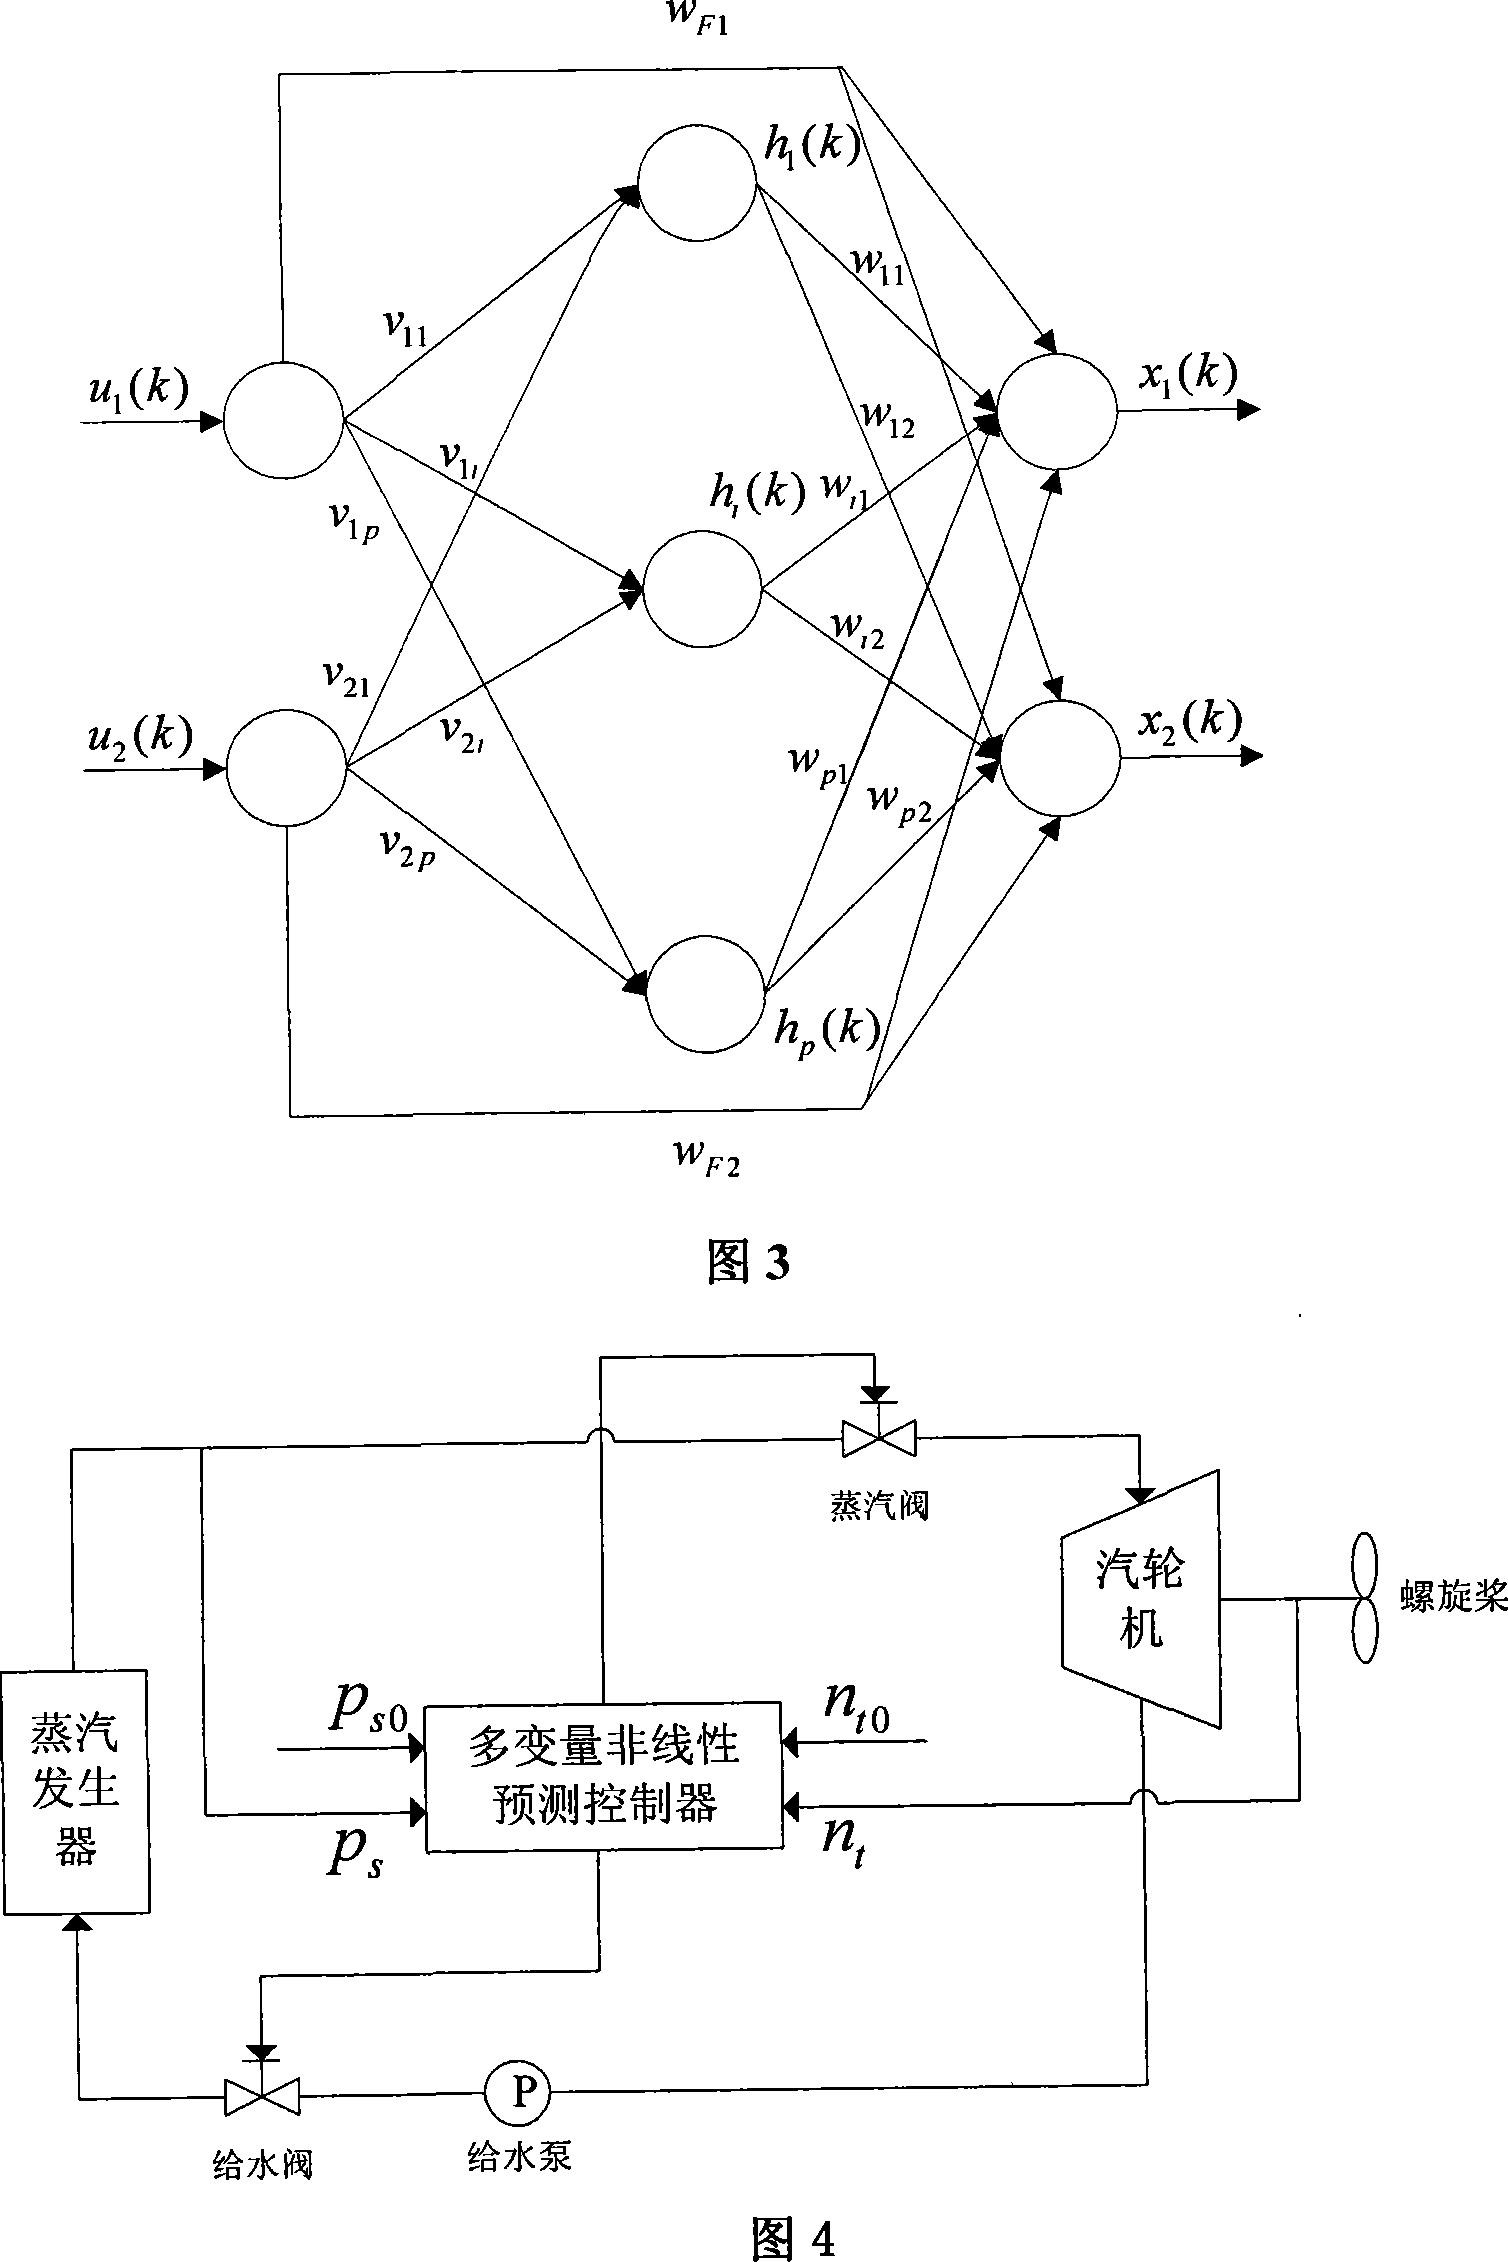 Nuclear power device two-loop multi-variable integrated model fuzzy predication control method